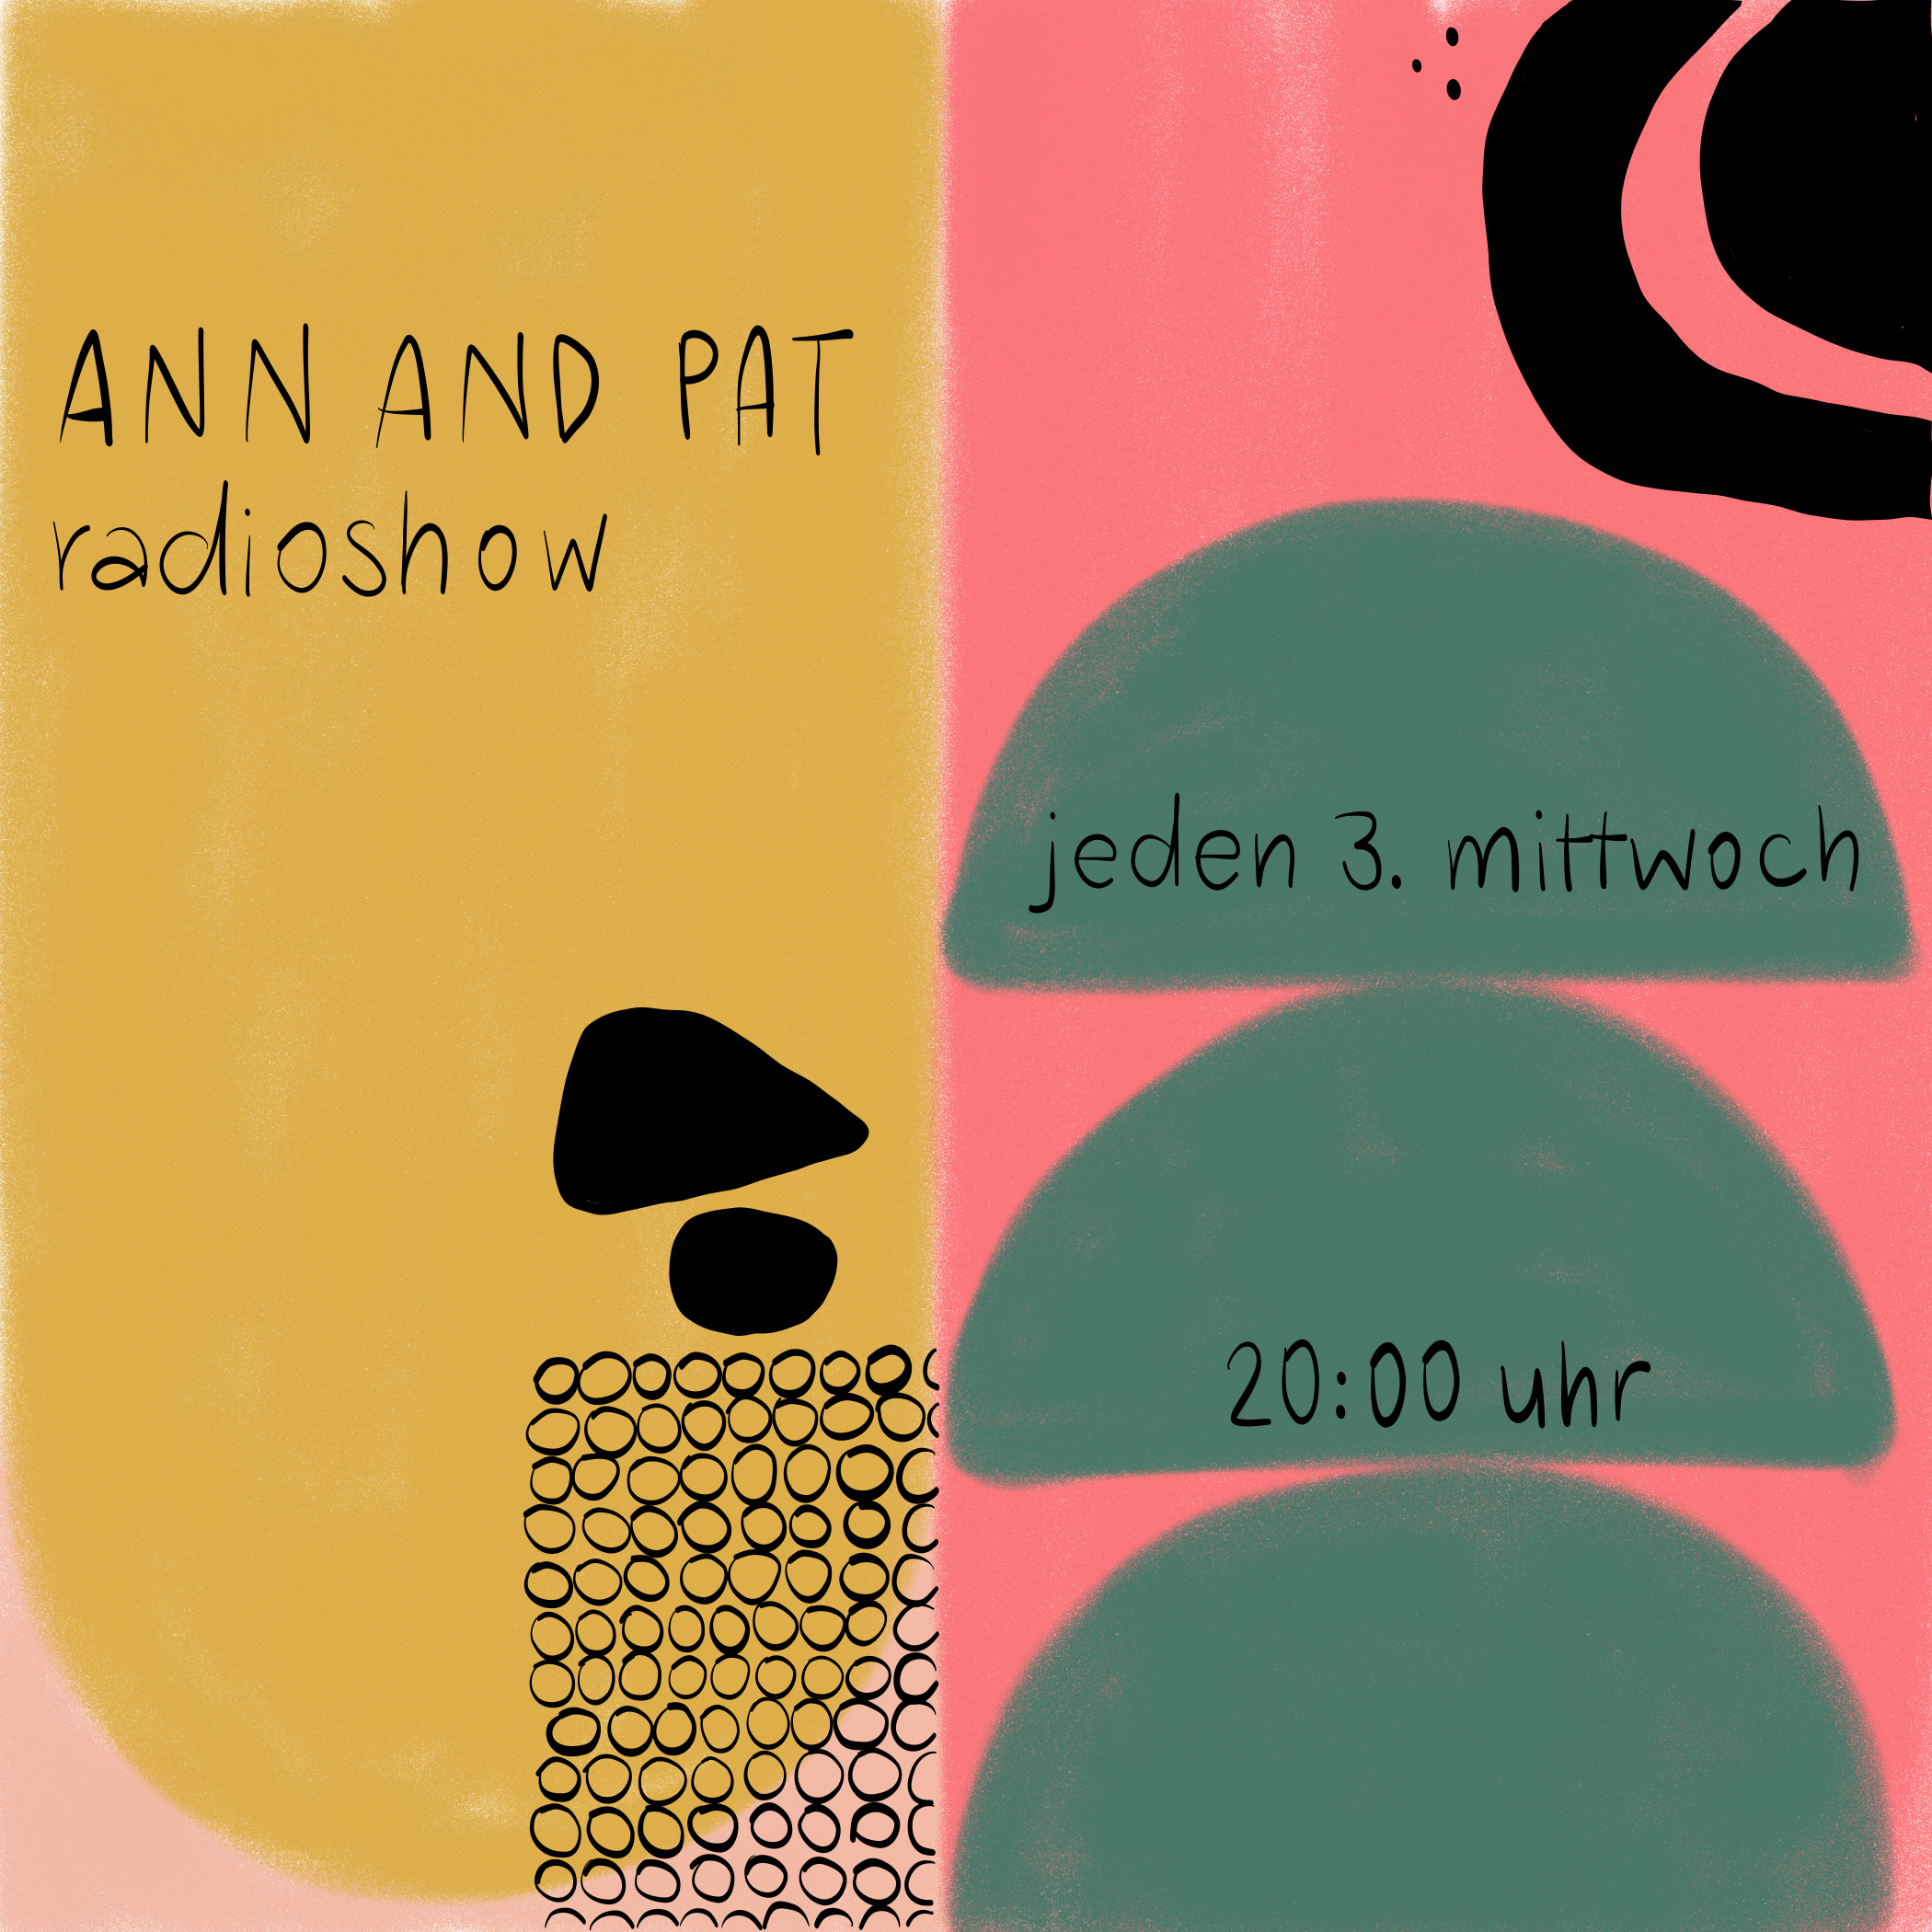 ann and pat Radioshow – Sleepless | cba – cultural broadcasting archive